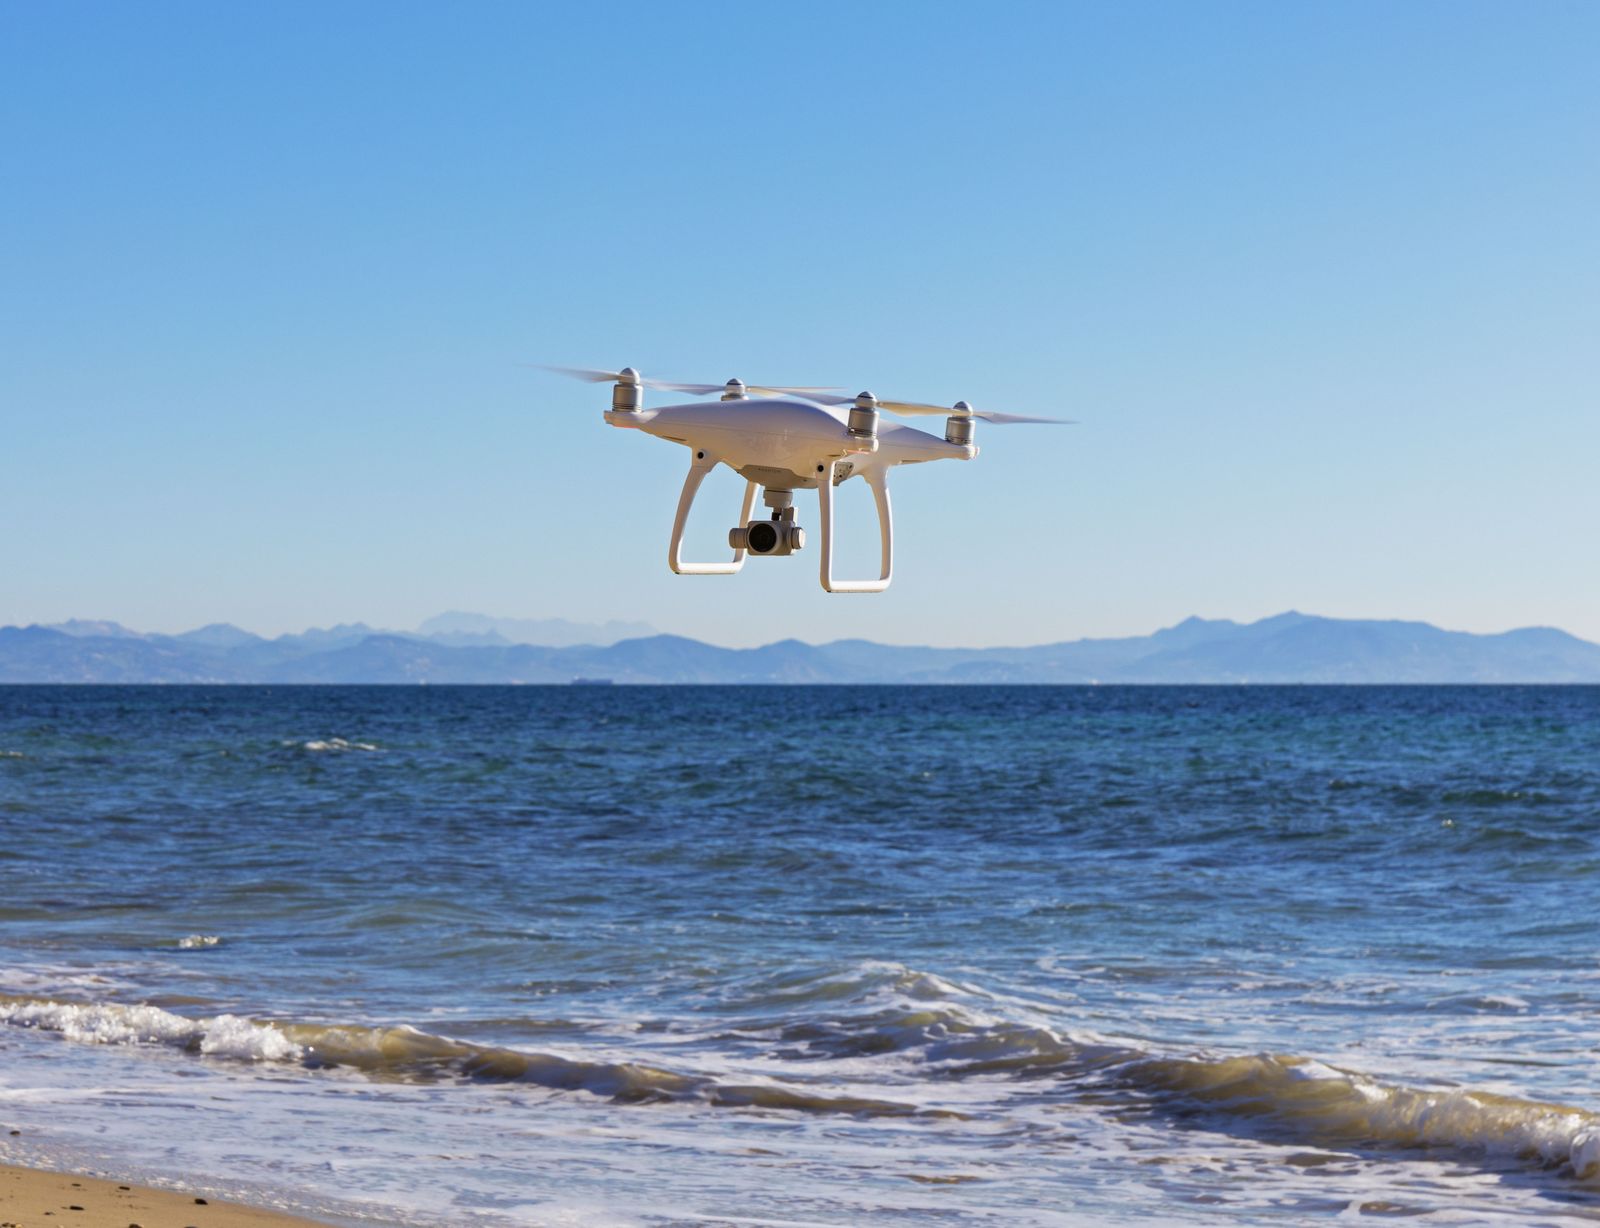 Is Fishing With a Drone the Way of the Future?